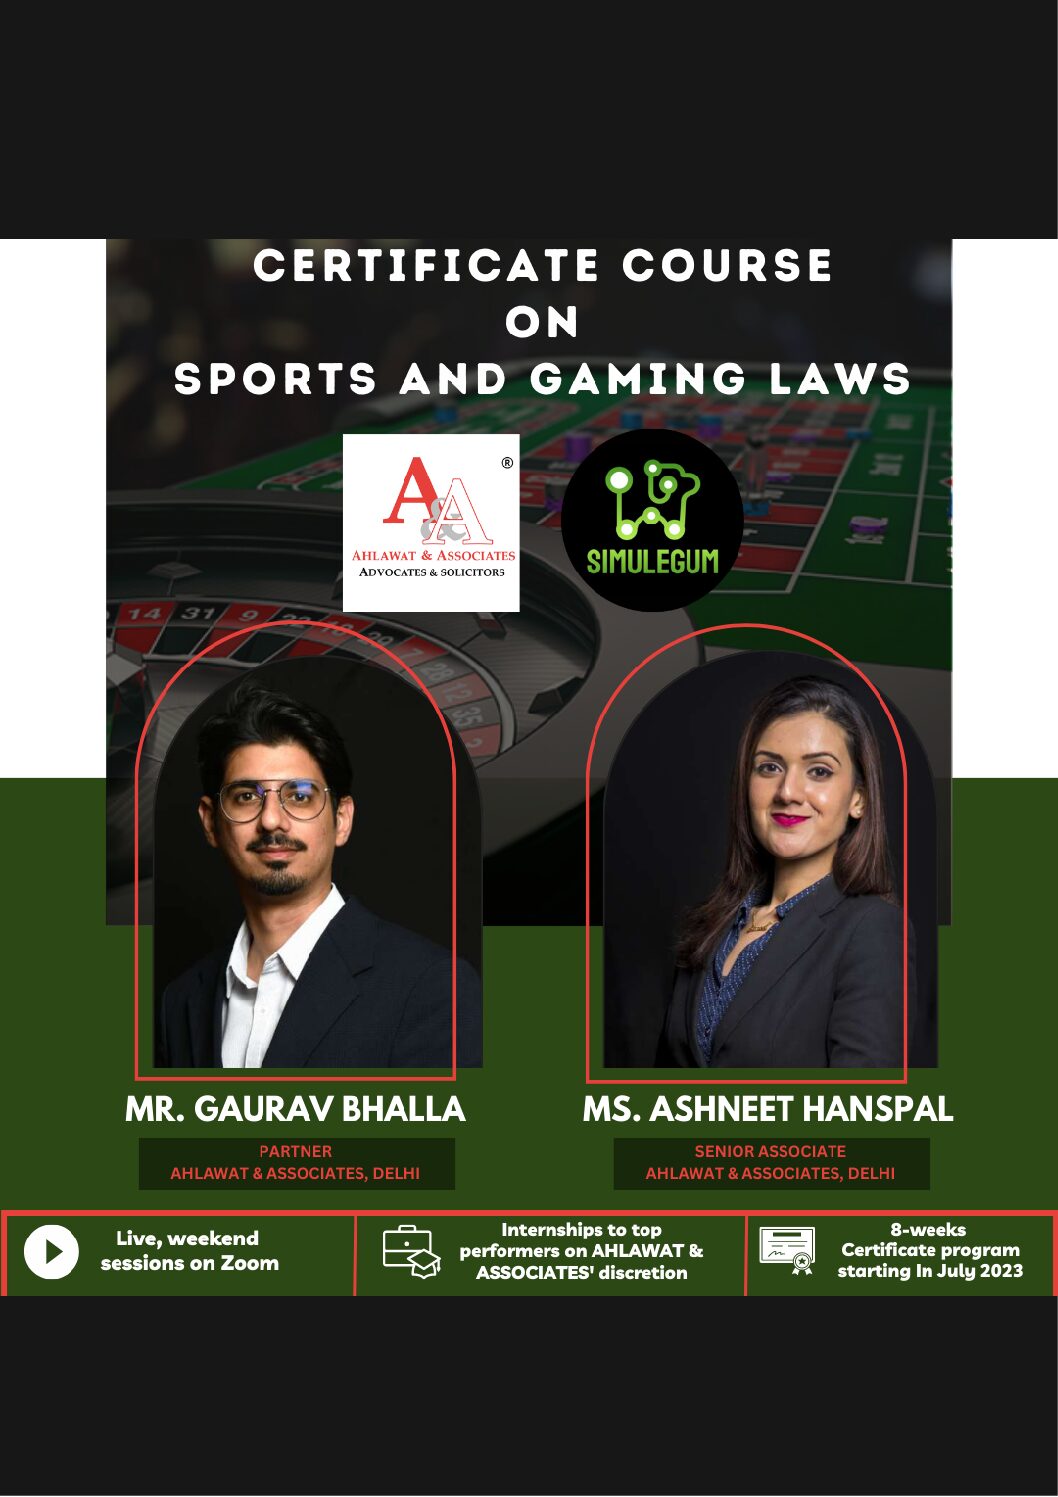 Certificate Course on Sports and Gaming Law by Ahlawat & Associates & Simulegum